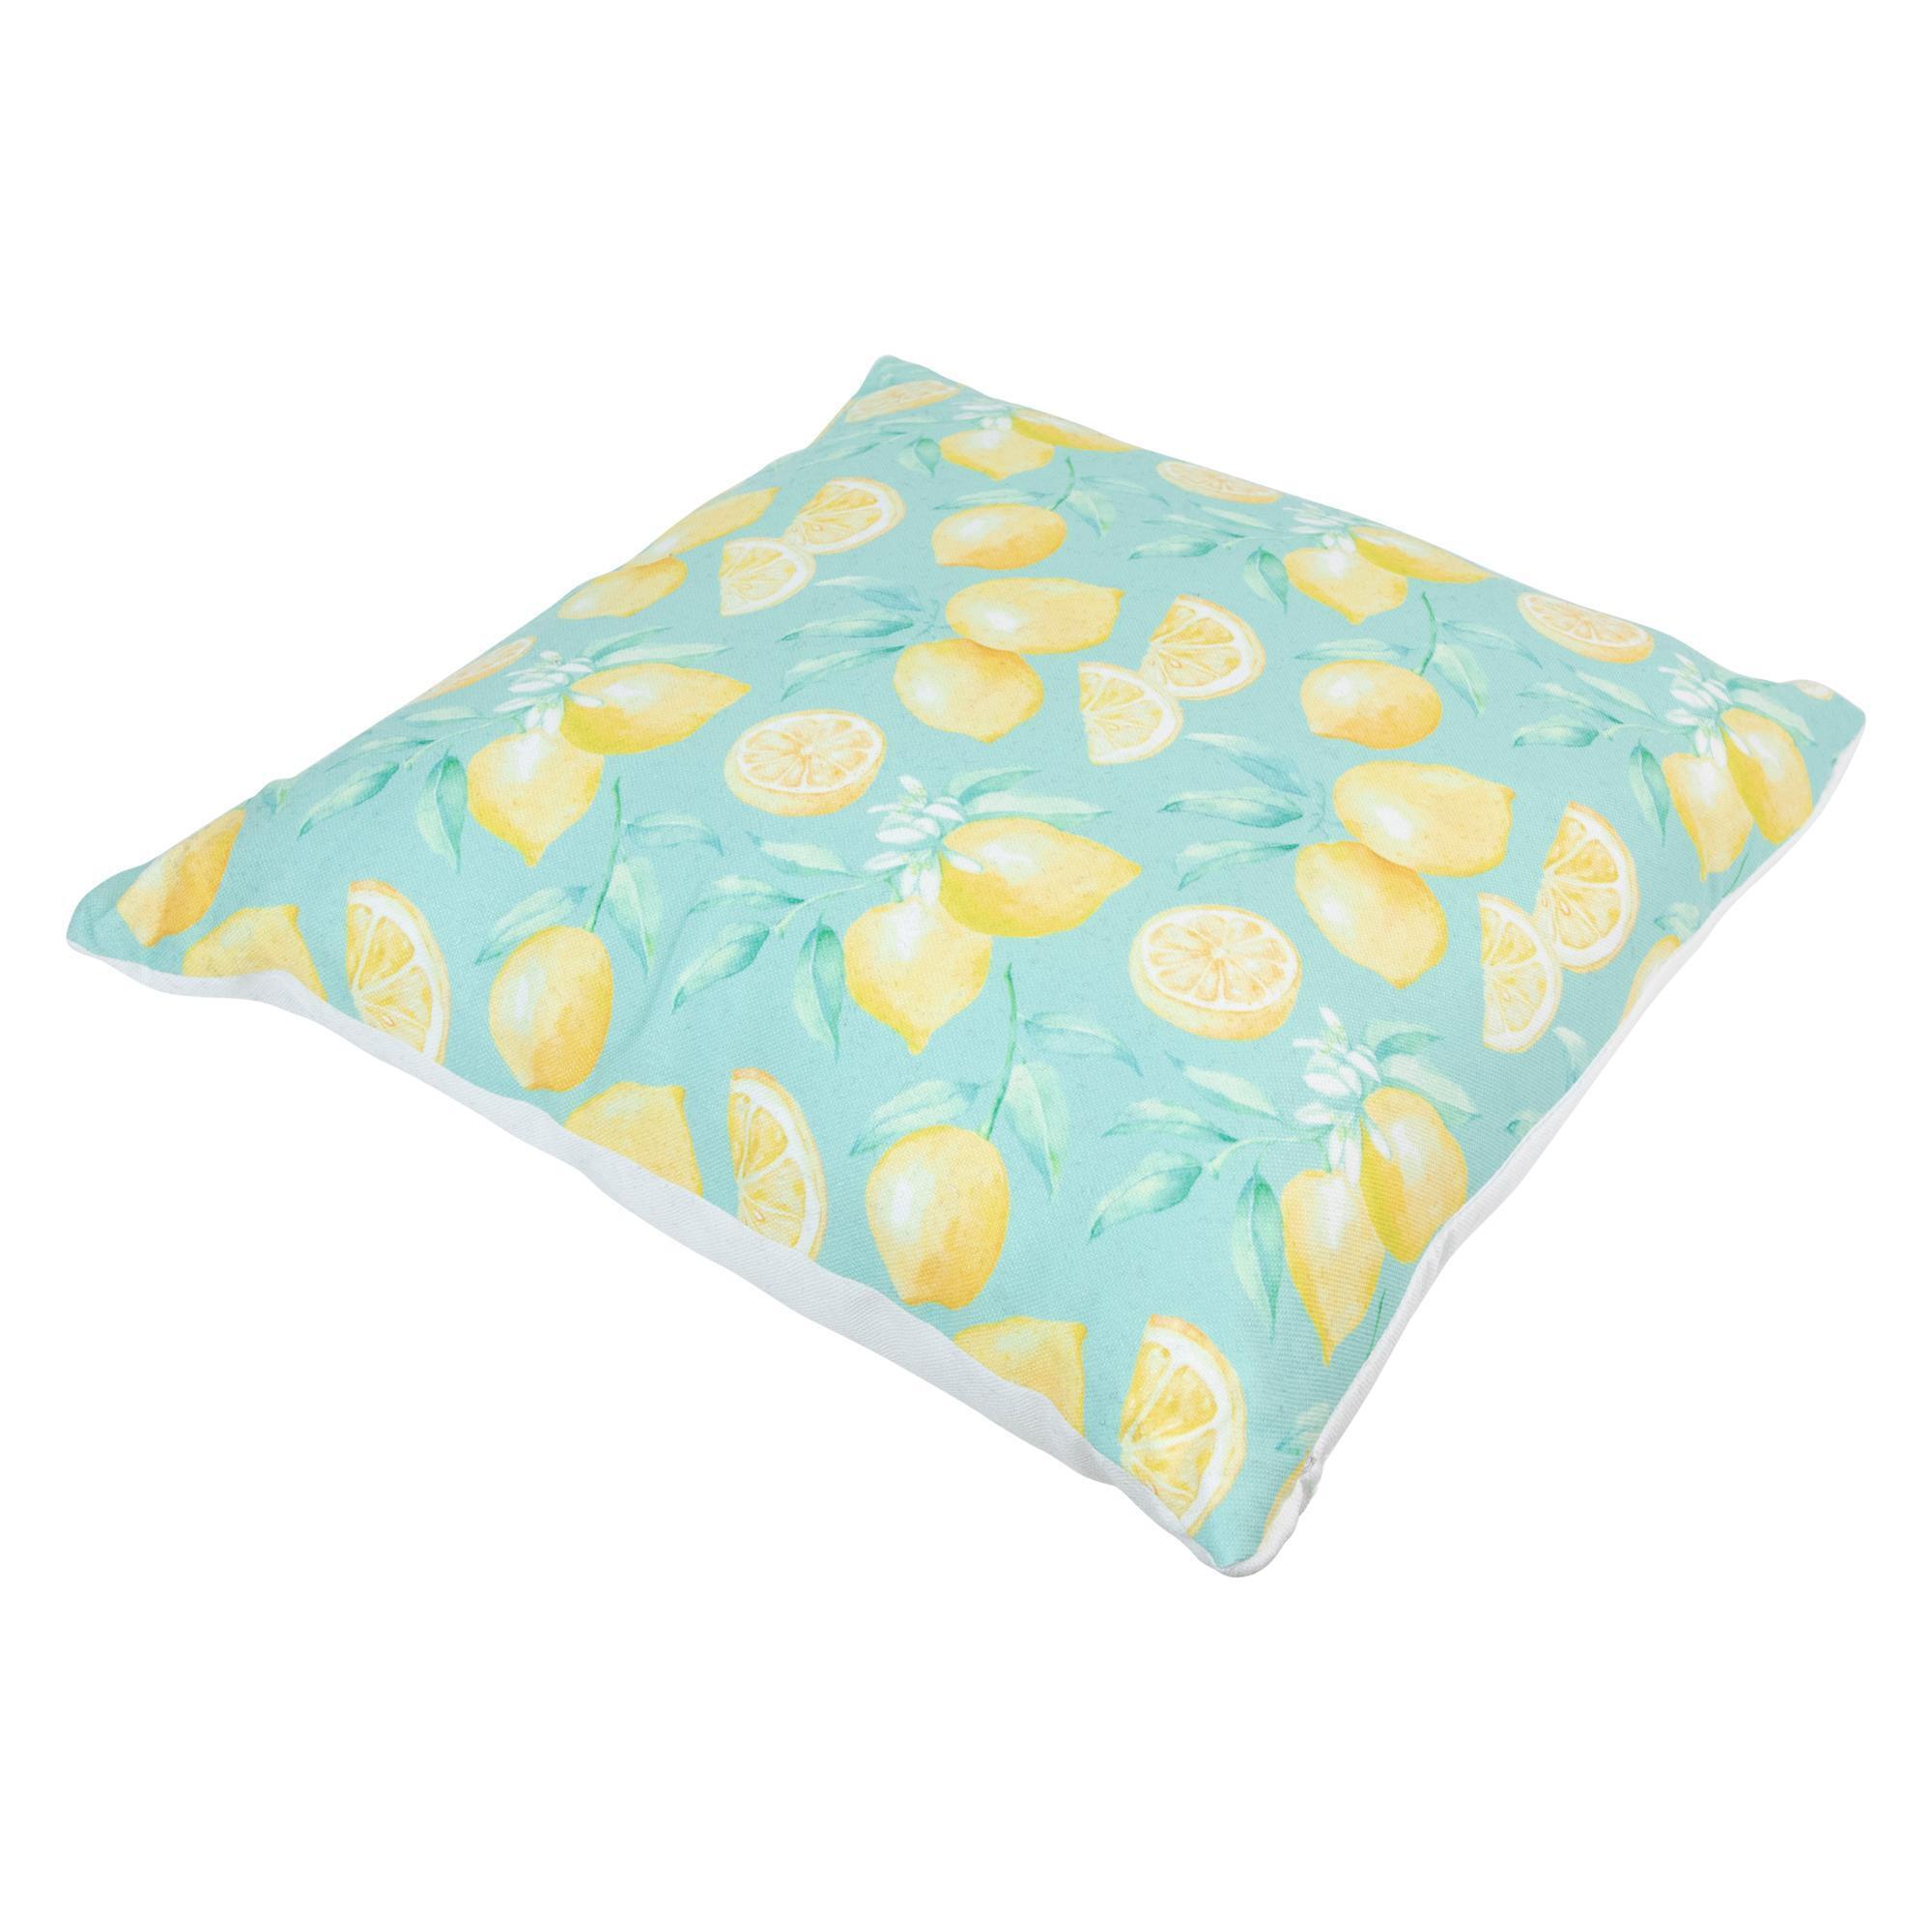 18" Blue and Yellow Tropical Lemons Square Throw Pillow alternate image